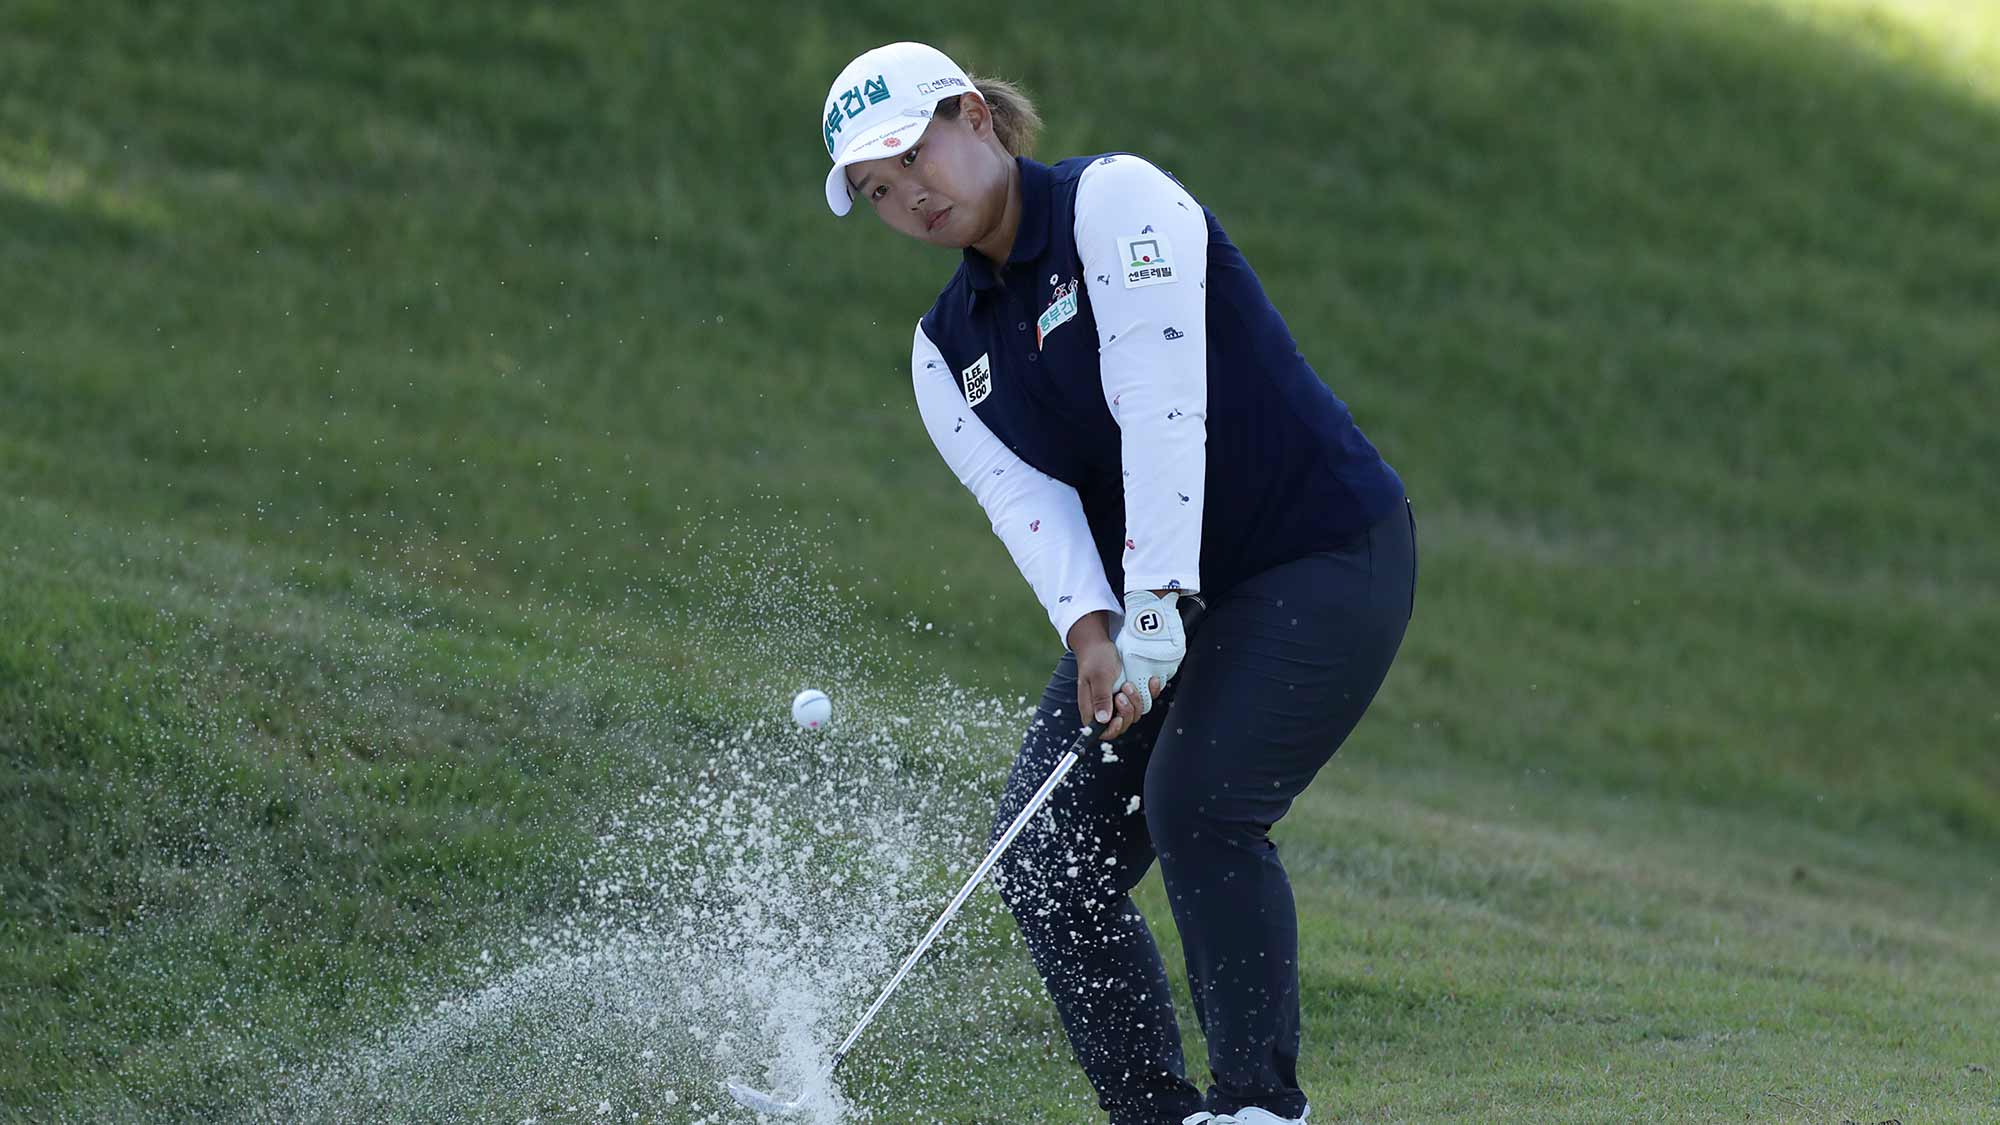 Hee Won Na of the Republic of Korea plays a bunker shot on the fifteen hole during Round 2 of 2019 BMW Ladies Championship at LPGA International Busan on October 25, 2019 in Busan, Republic of Korea